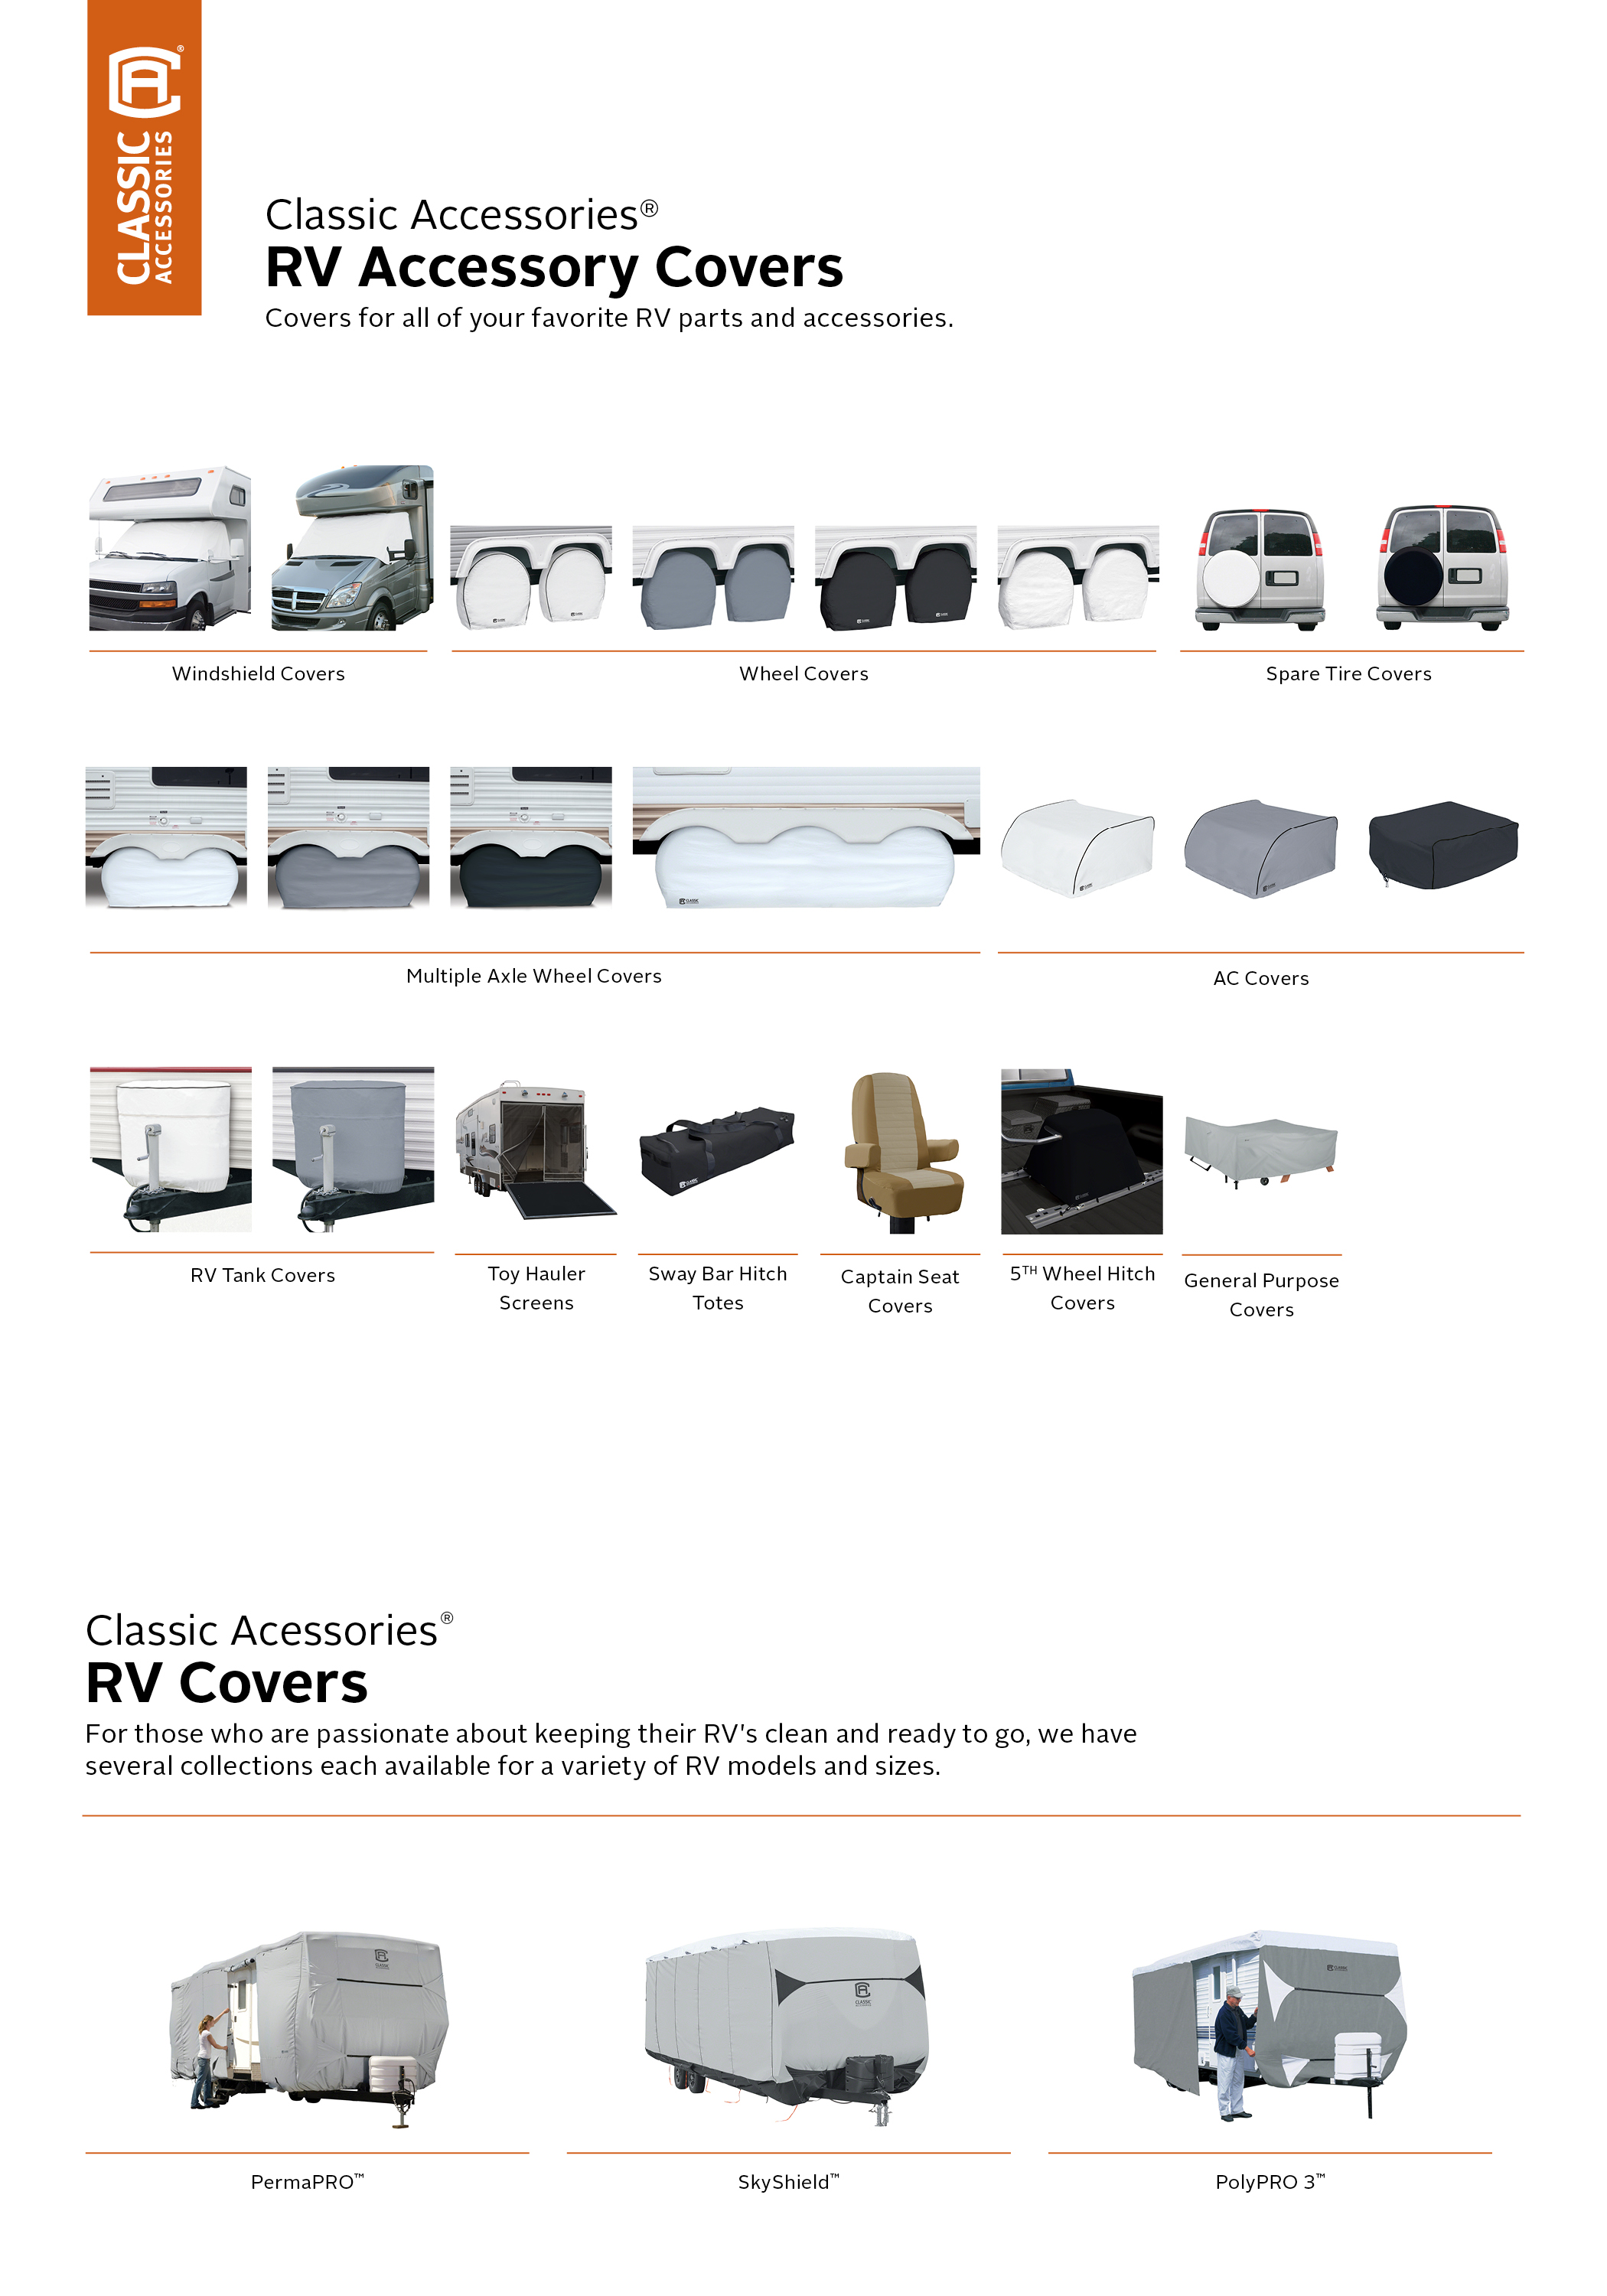 Classic Accessories OverDrive RV Windshield Cover, White - image 4 of 8